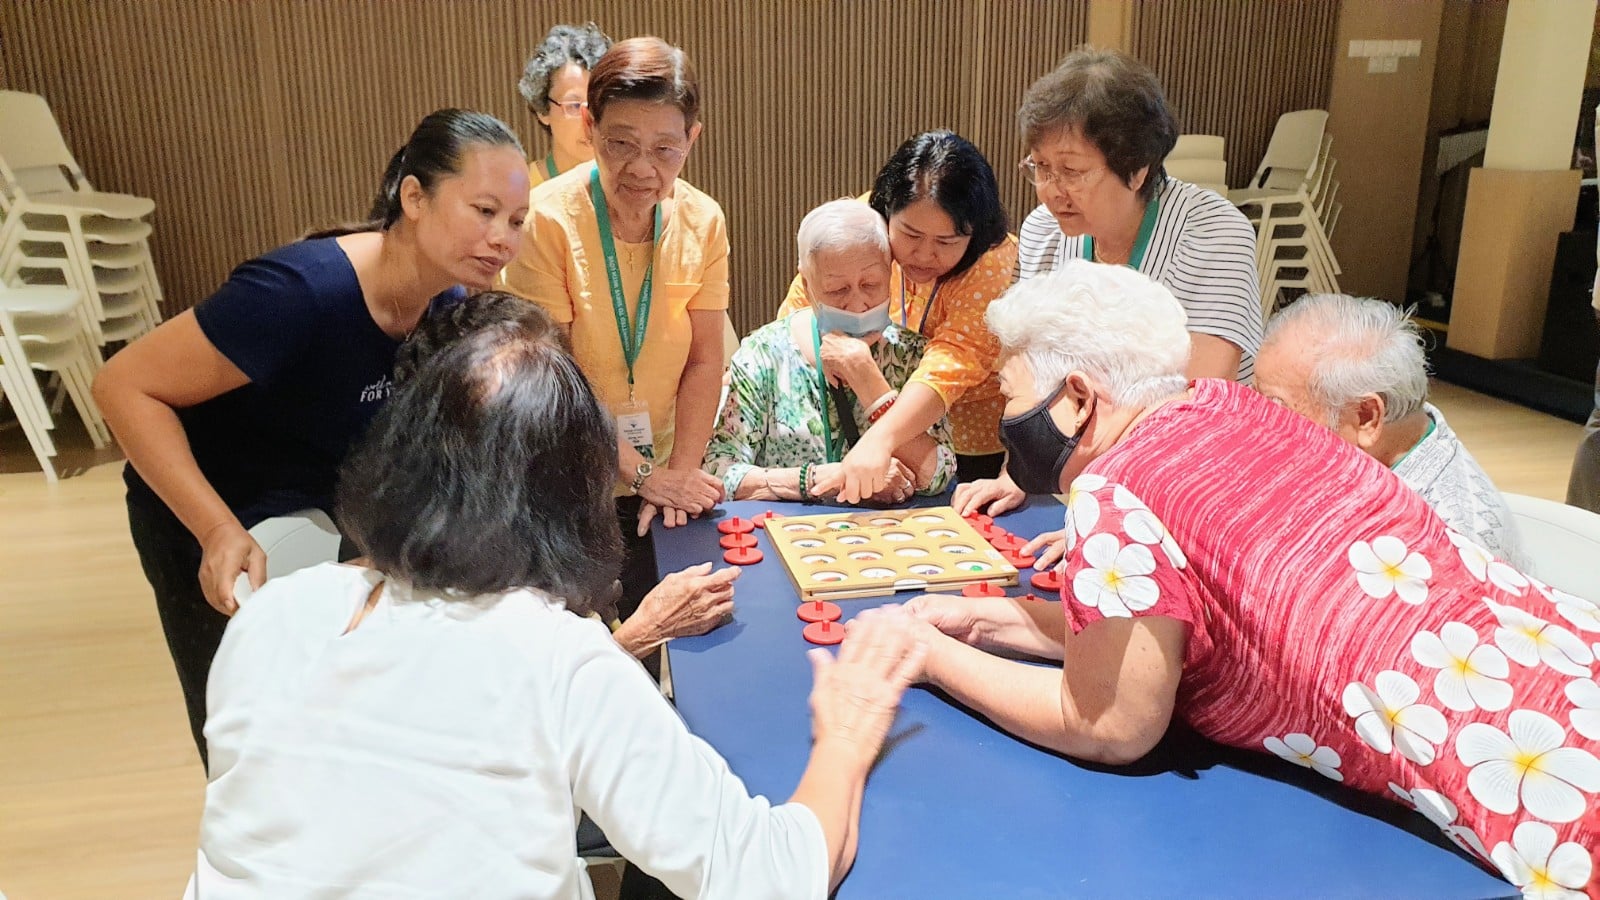 “The Church is called to minister to the vulnerable, and persons living with dementia are among the most vulnerable individuals in Singapore today. We would be ignoring God’s call if we were to neglect them,” said Leow Wen Pin, founder of Koinonia Inclusion Network, which advocates for disability-inclusive churches.